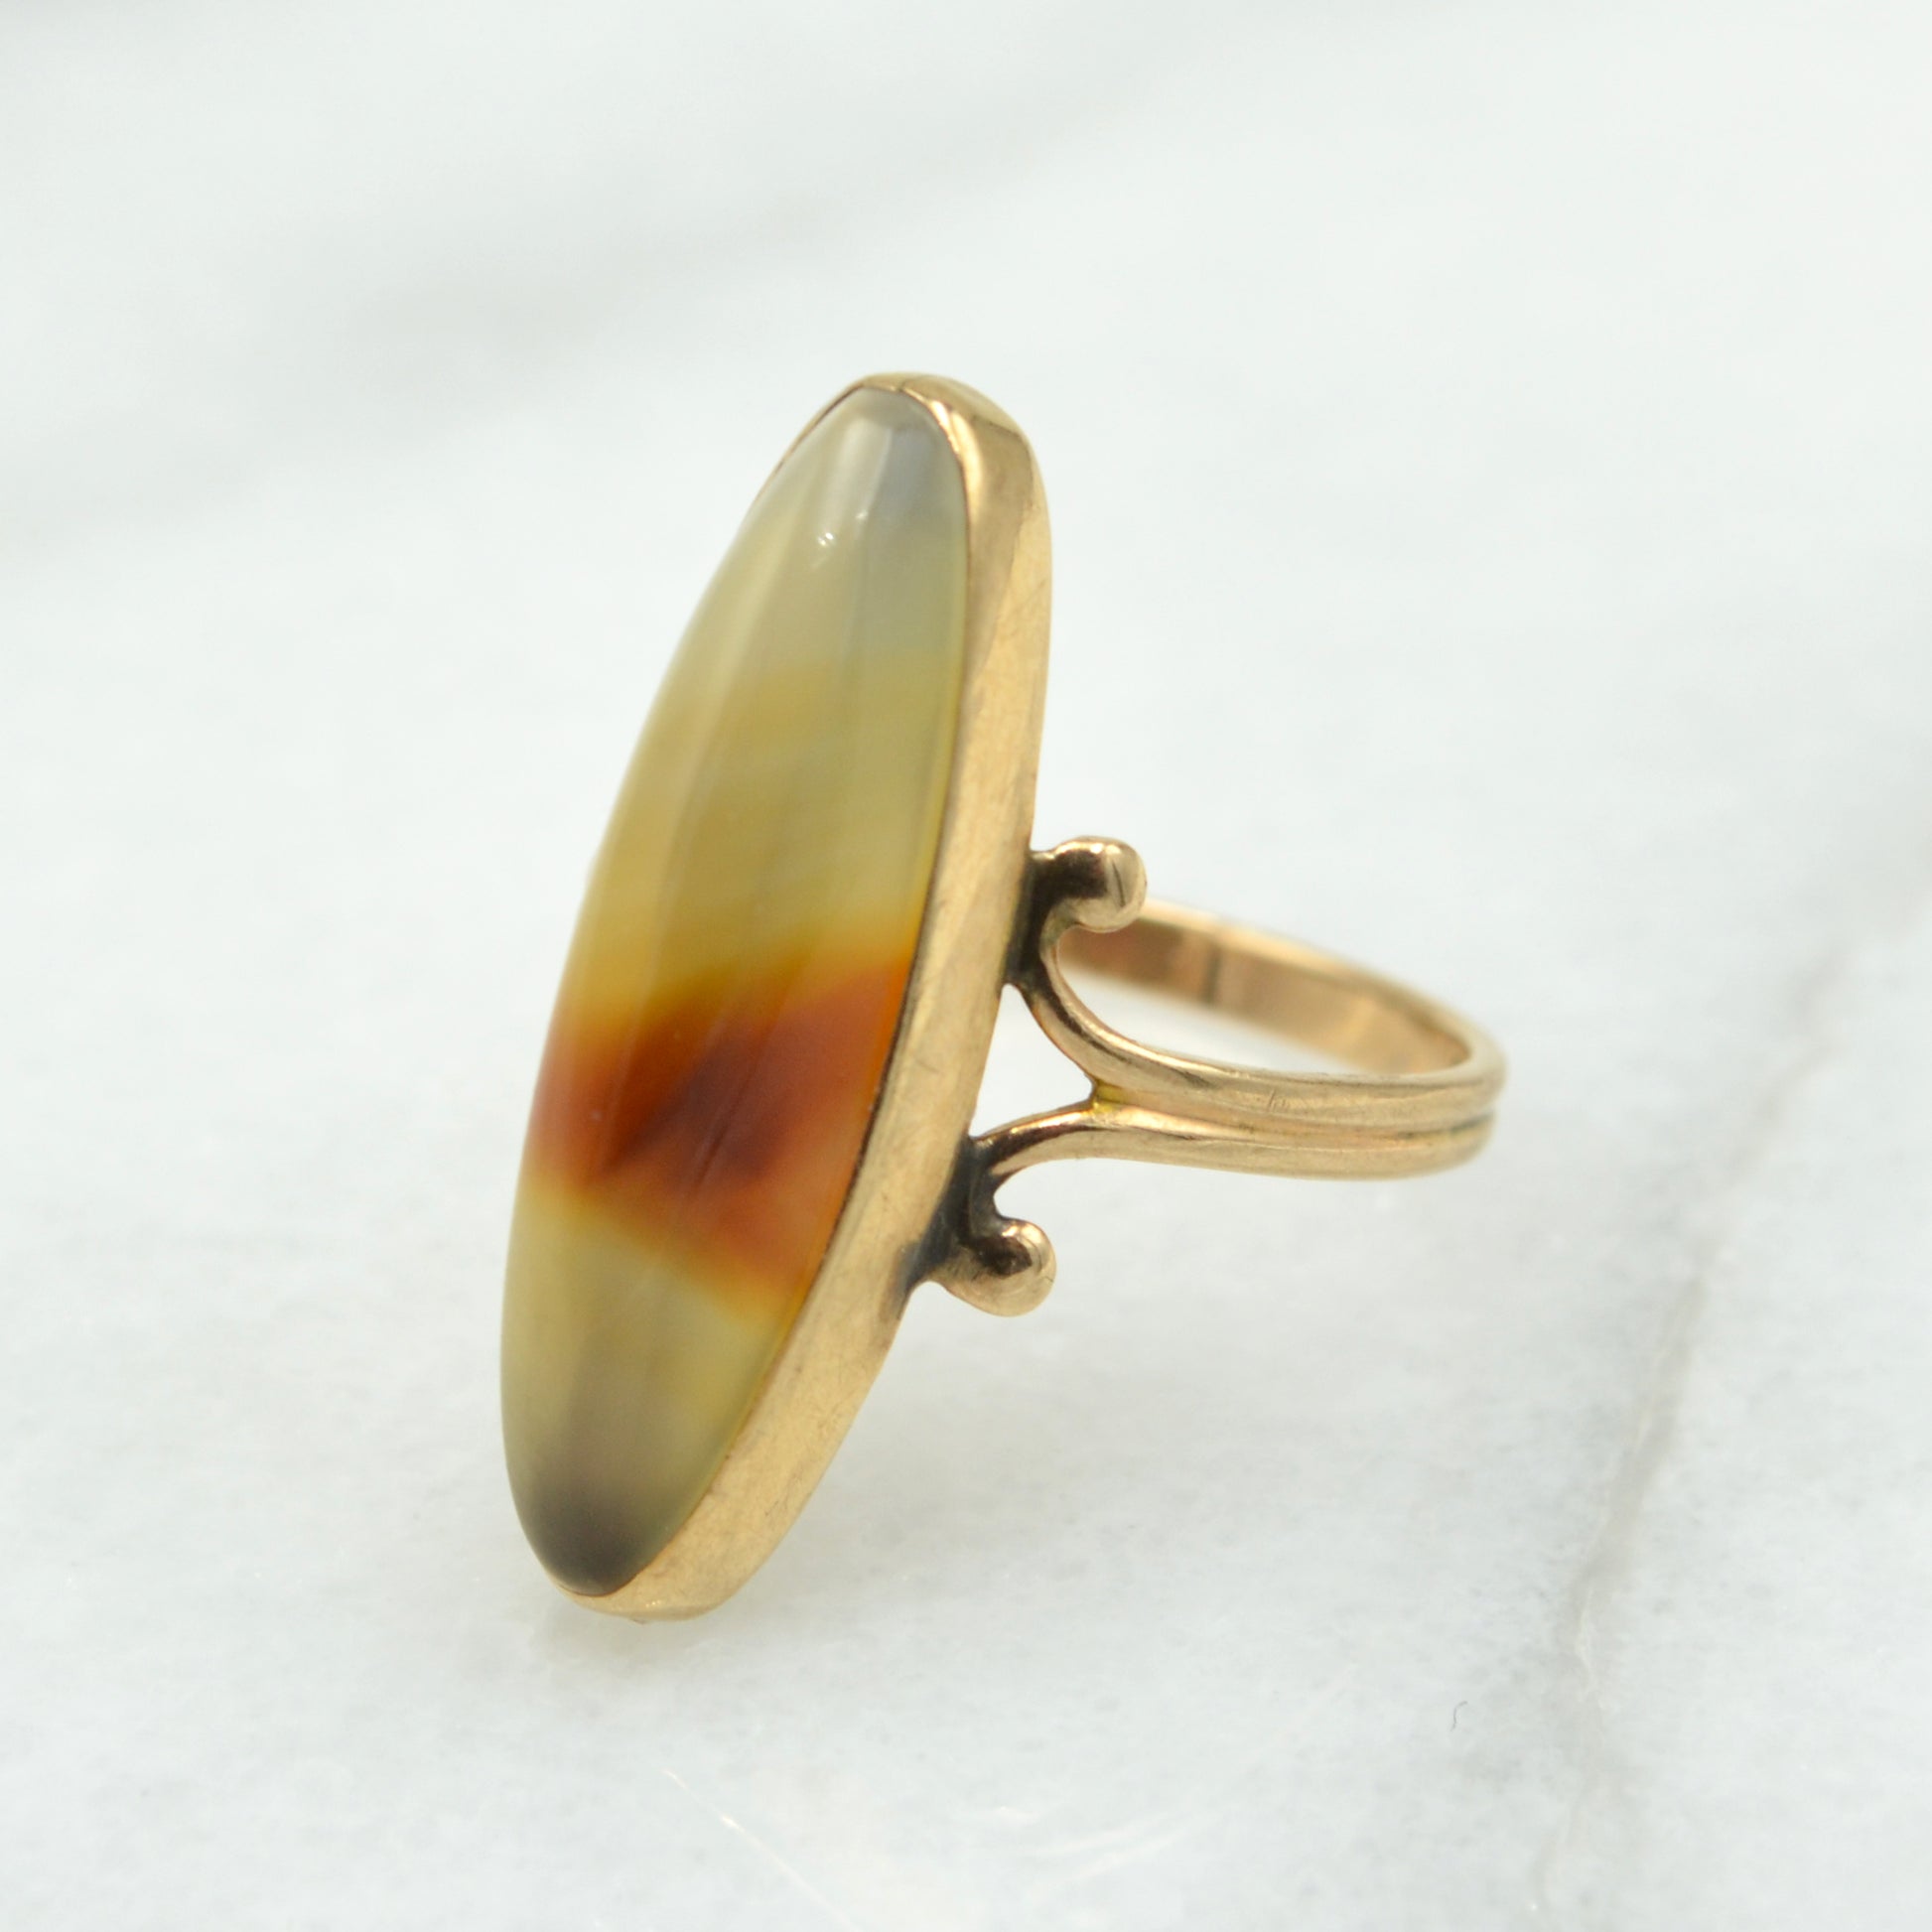 Antique Victorian Agate and 10k Gold Ring